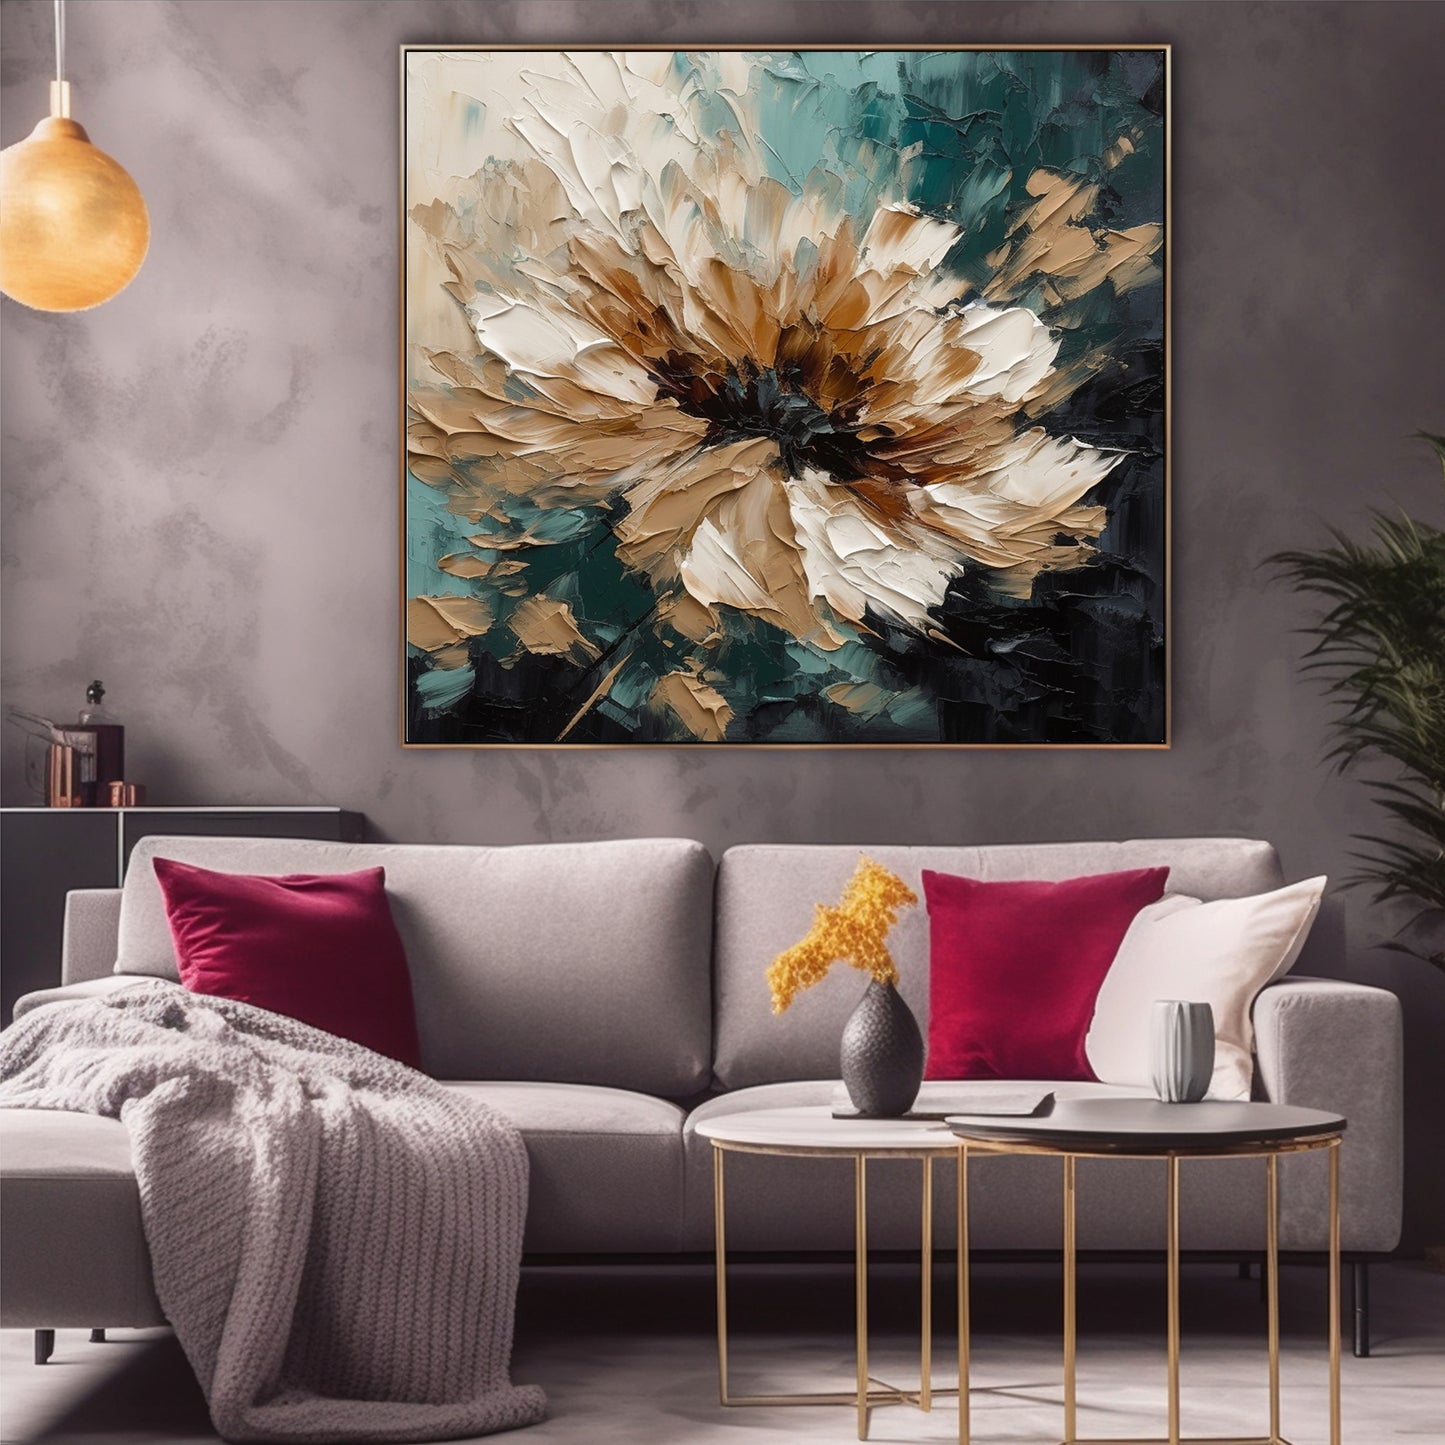 Texture Wall Decor Home Decor Gift Abstract Floral Painting F#BRT2368